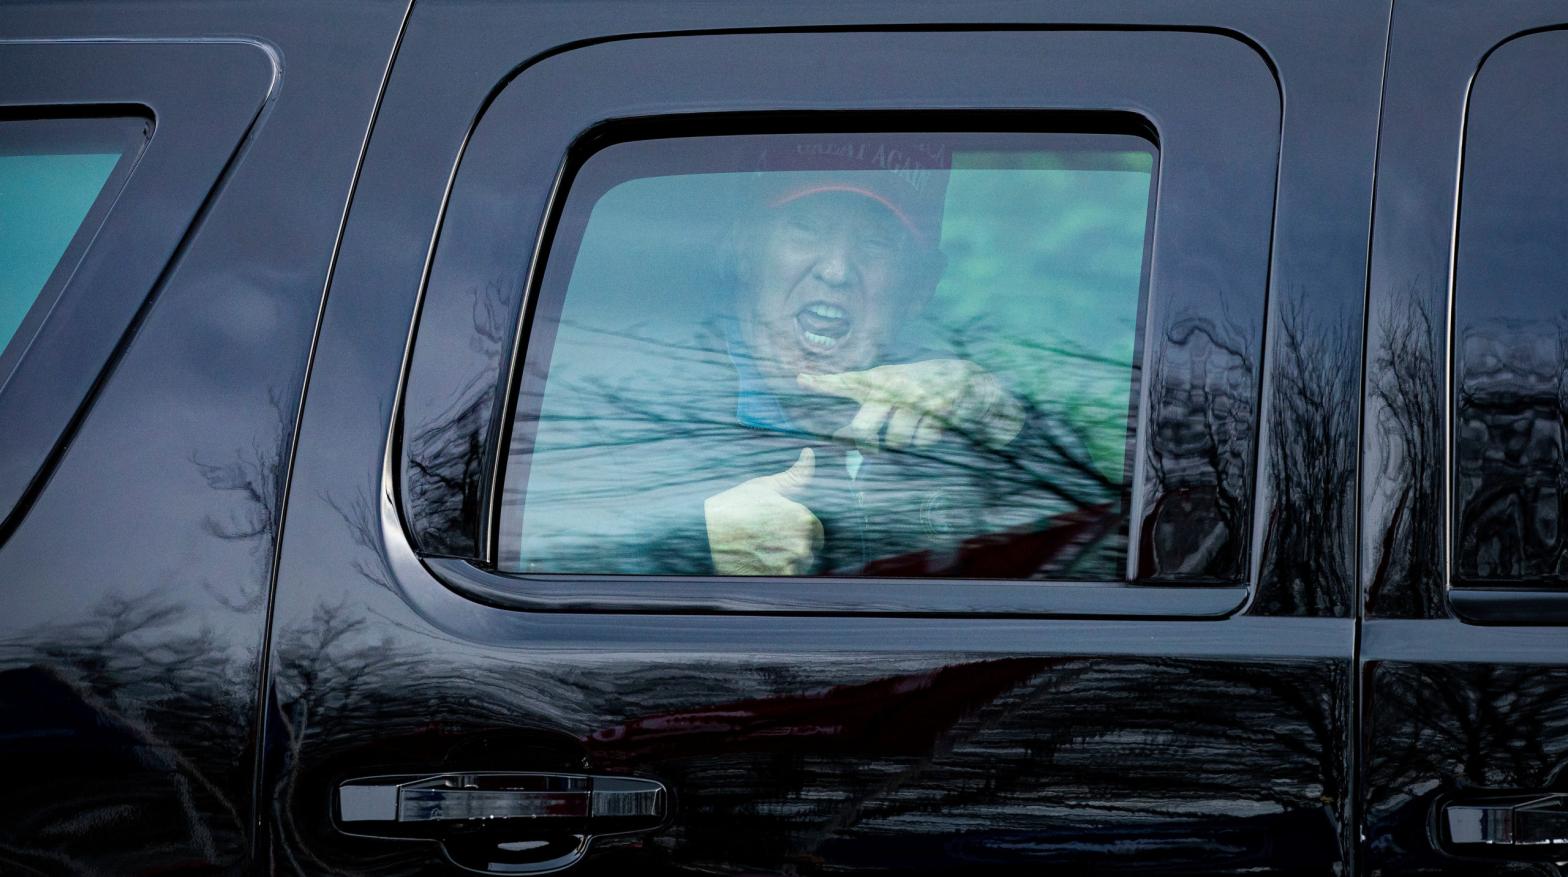 President Donald Trump, a man with the blood of 300,000 American covid-19 victims on his hands, departs Trump National Golf Club on December 13, 2020 in Stirling, Virginia. (Photo: Al Drago, Getty Images)